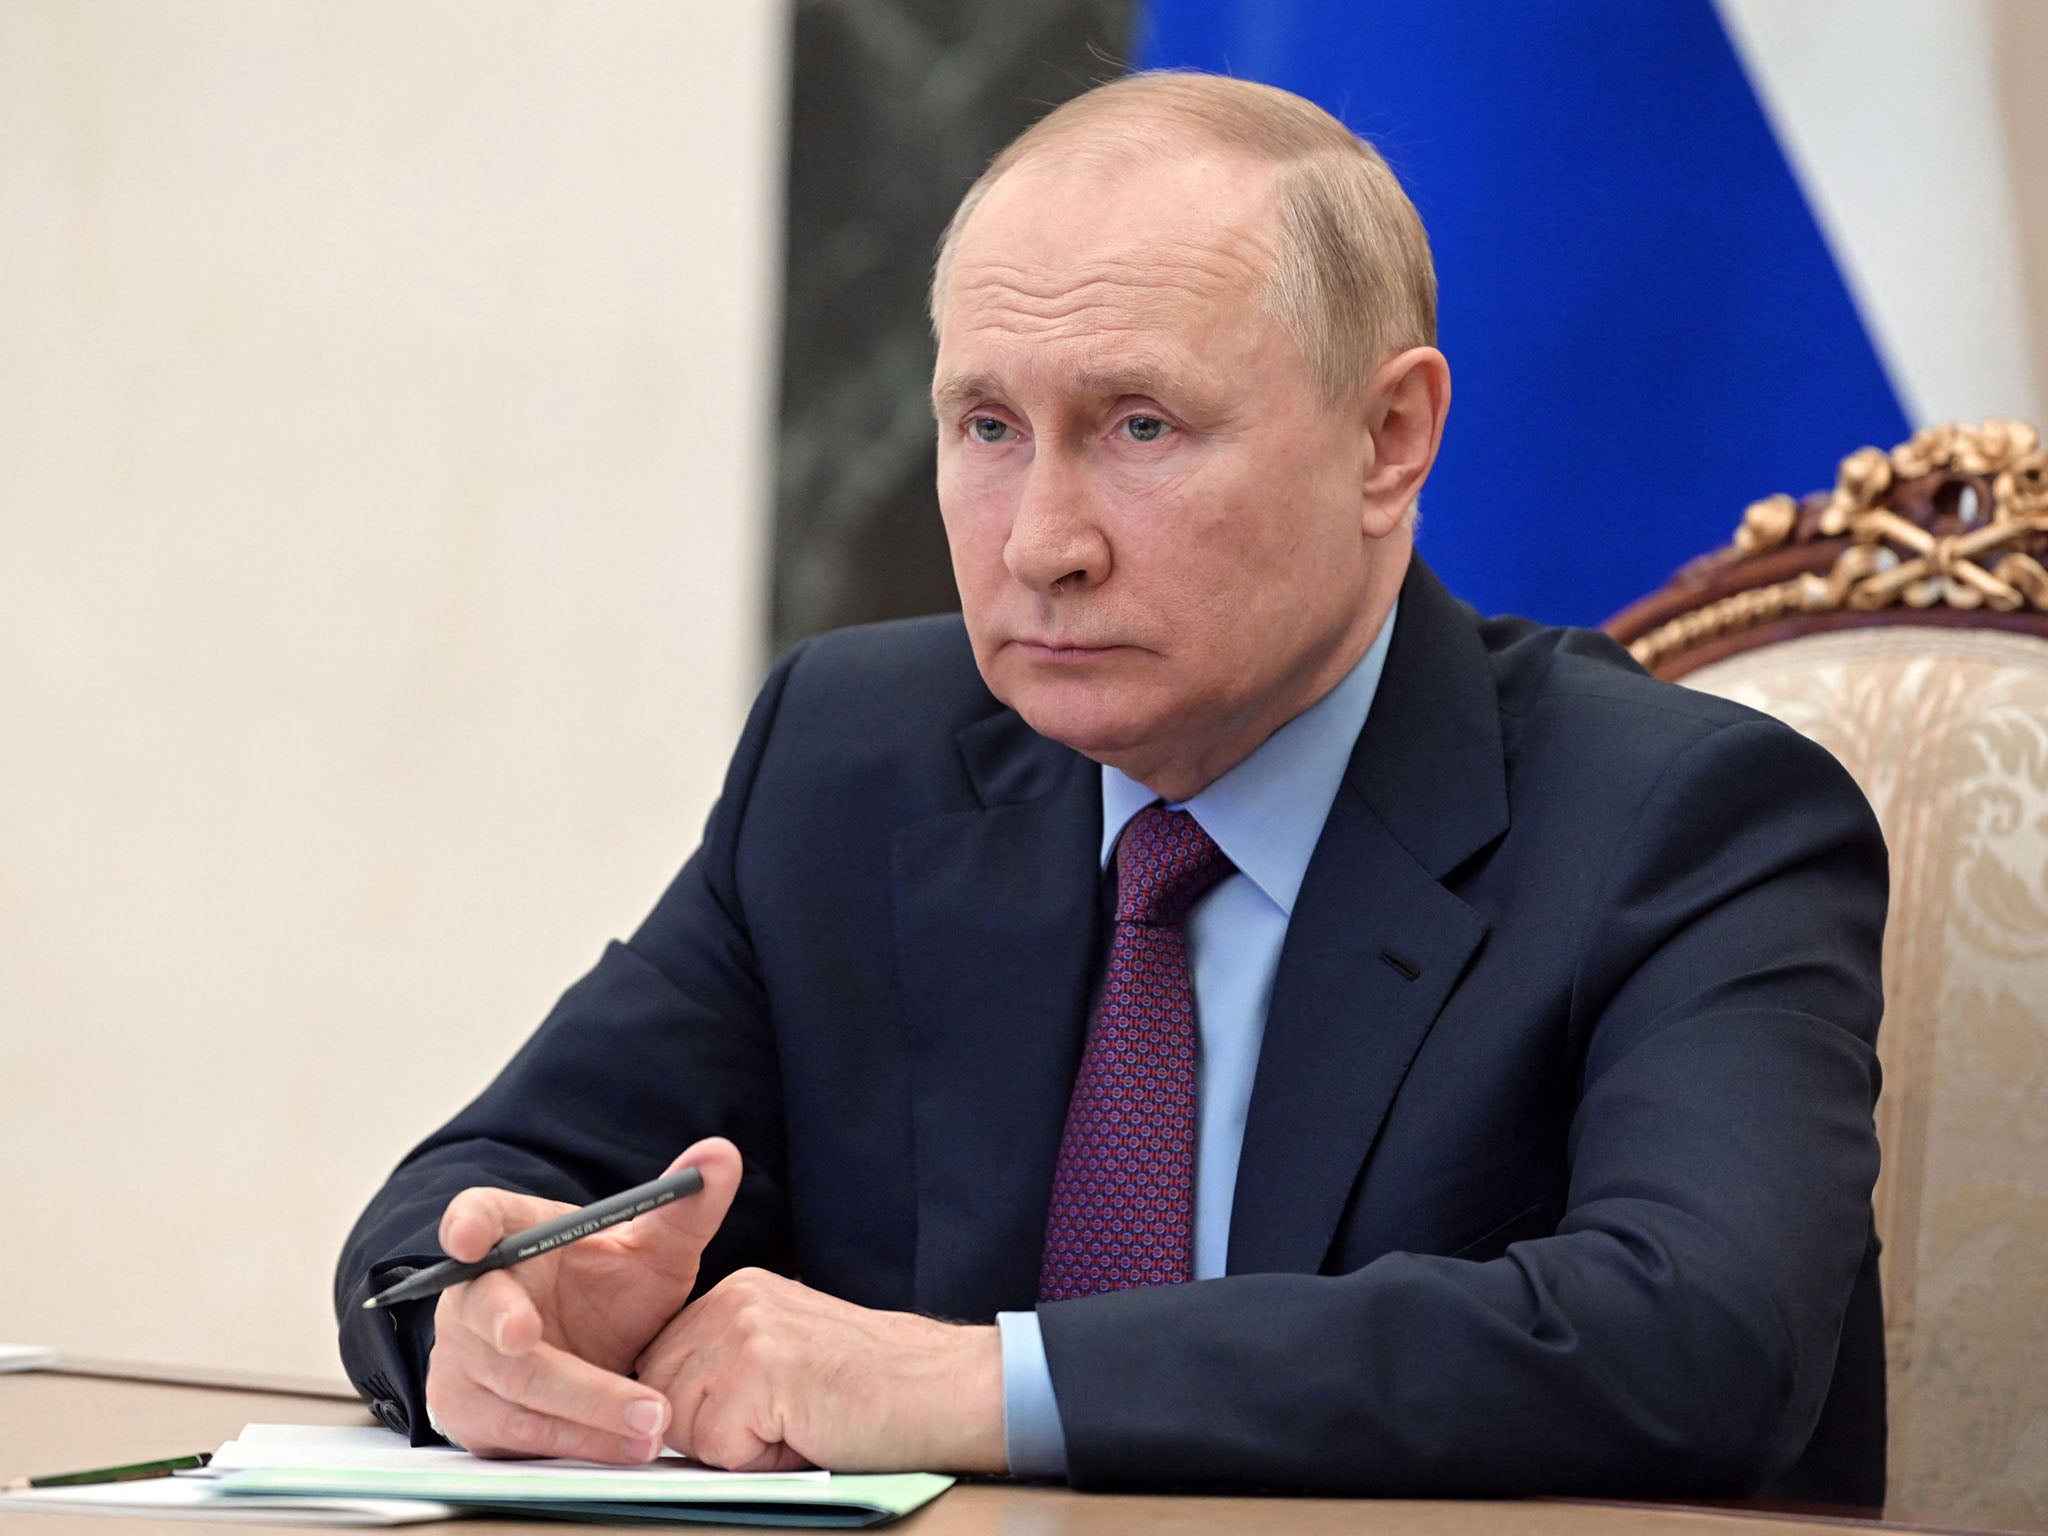 Russian President Vladimir Putin chairs a meeting in Moscow in early August